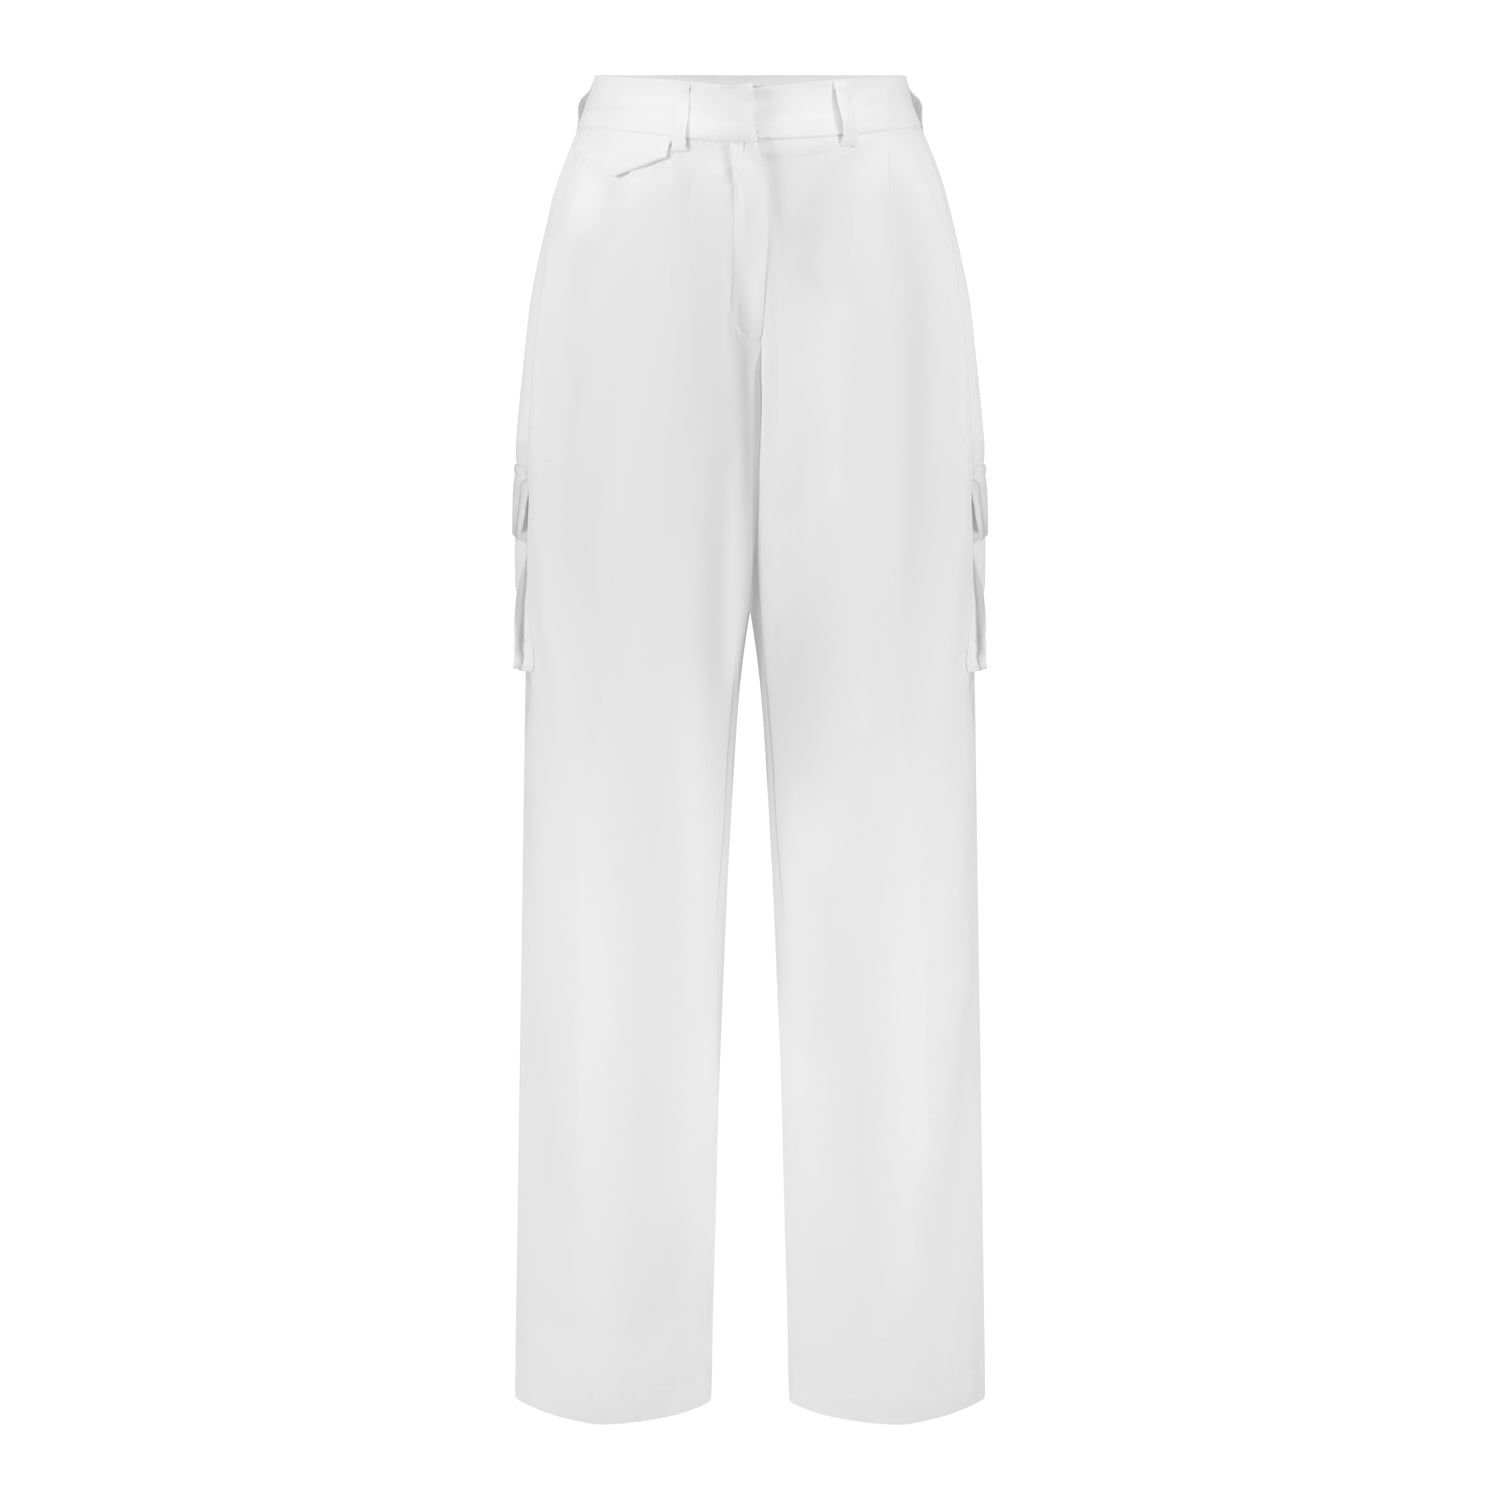 Fancysters Women Wide Leg Linen Pants, High Waisted Summer Casual Cotton  Linen Palazzo Pants with Pockets White at Amazon Women's Clothing store